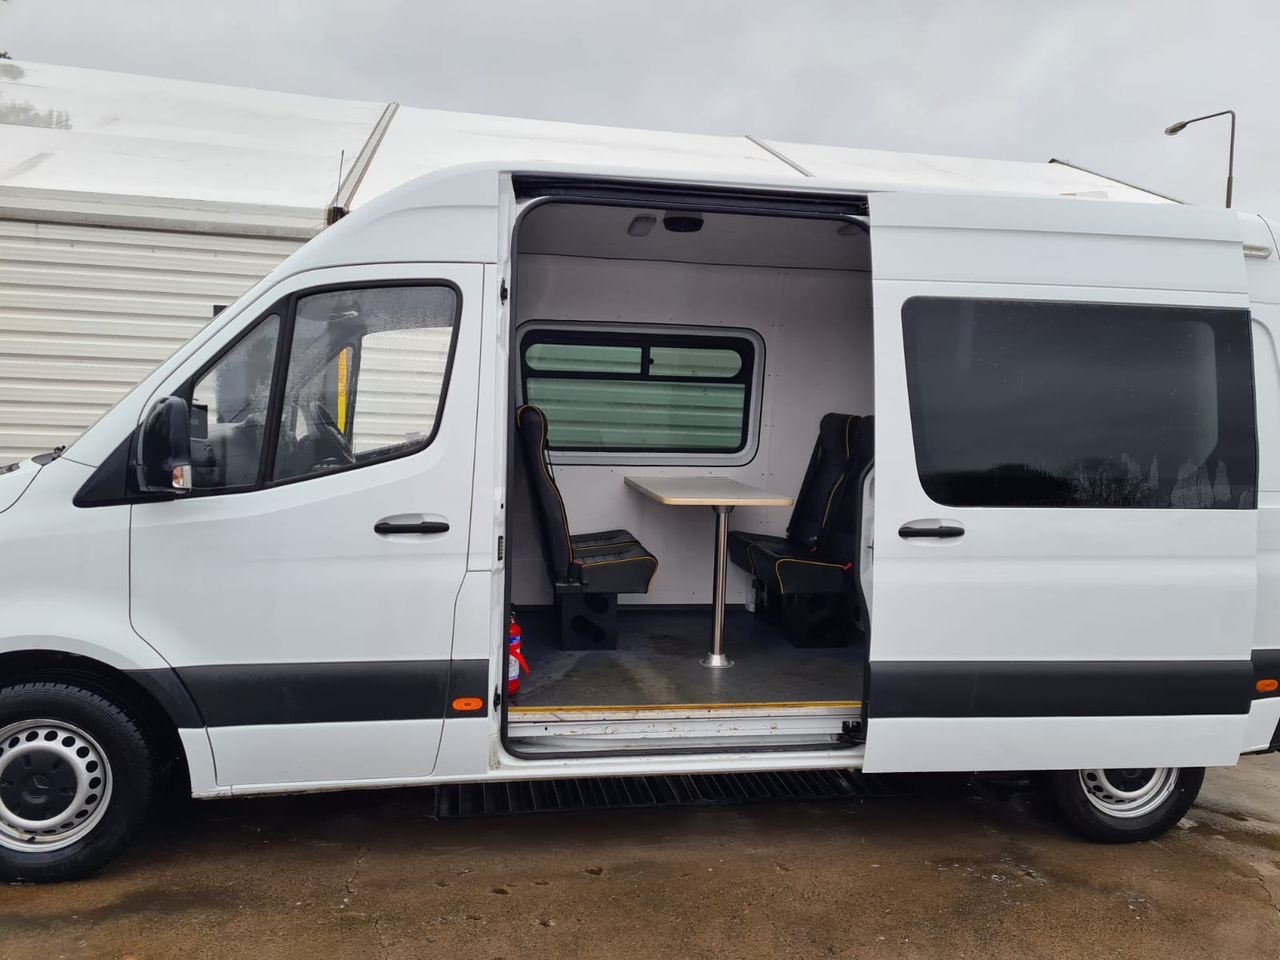 Ready to go Mercedes-Benz SPRINTER 314 L2 H2 FWD, Van, 140, Under 3.5 Tonne, Single Cab, Manual, Rear Beacons, Rear access step, Rear LED lights, Front LED Pulsating Beacons, Reversing Camera, , -, - | for sale at MV Commercial, the UKs leading Truck, Trailers and Van supplier. (NK20VTV 60651)